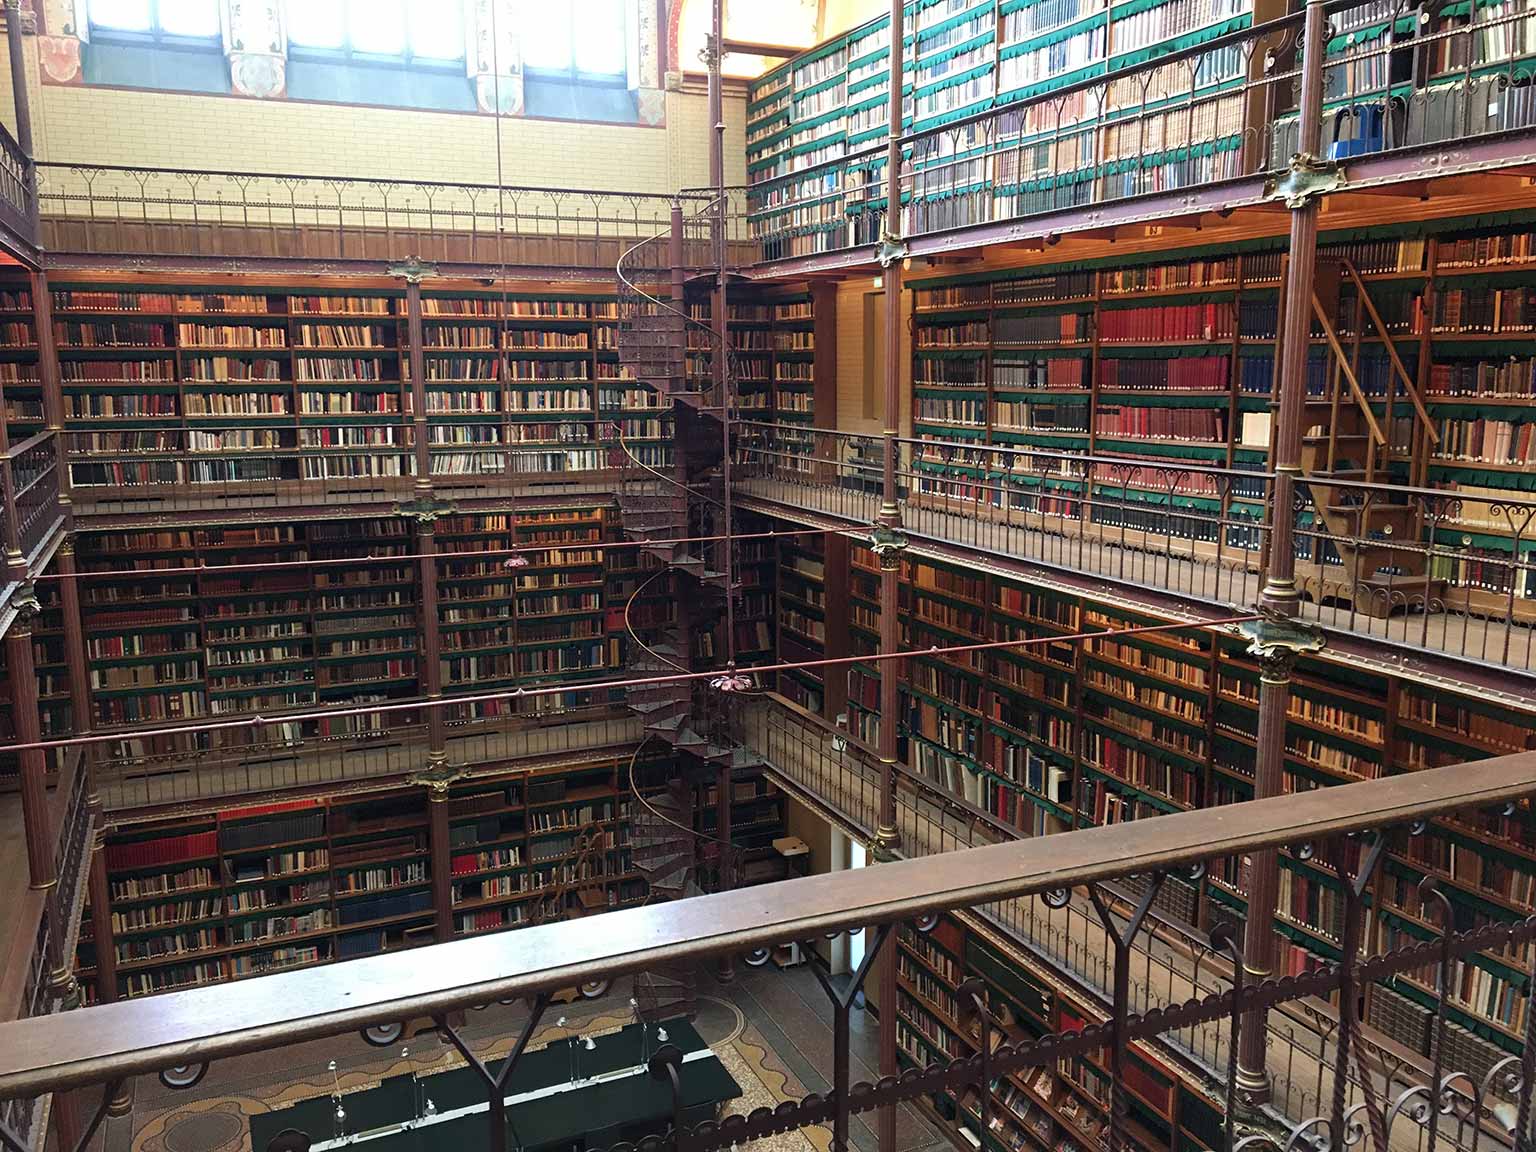 The Cuypers Library in the Rijksmuseum, Amsterdam